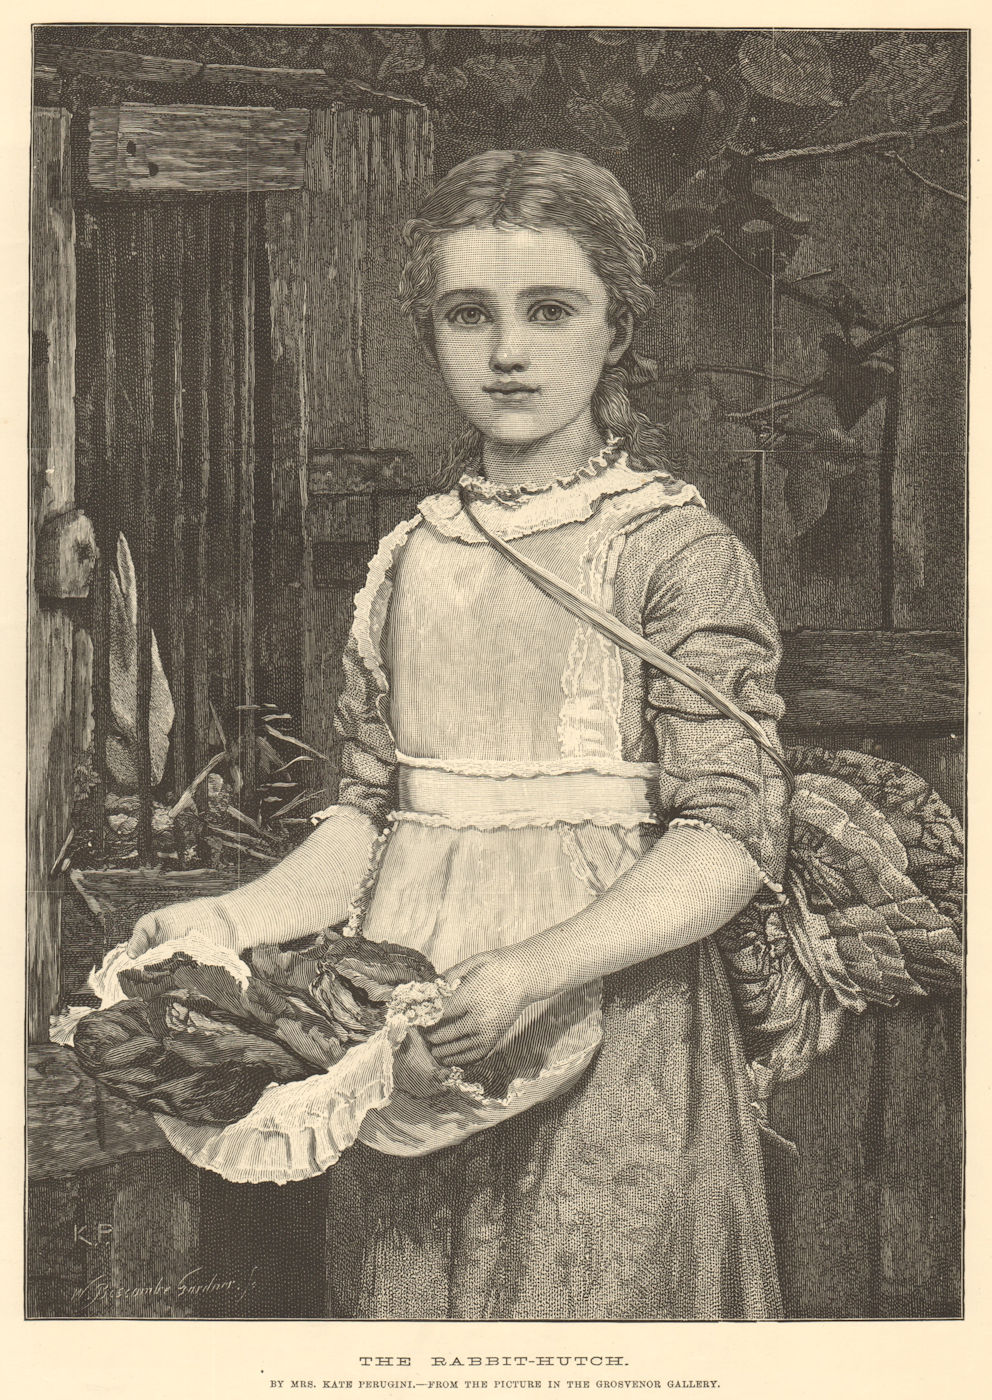 Associate Product "The rabbit-hutch", by Mrs. Kate Perugini. Ladies 1882 antique ILN full page